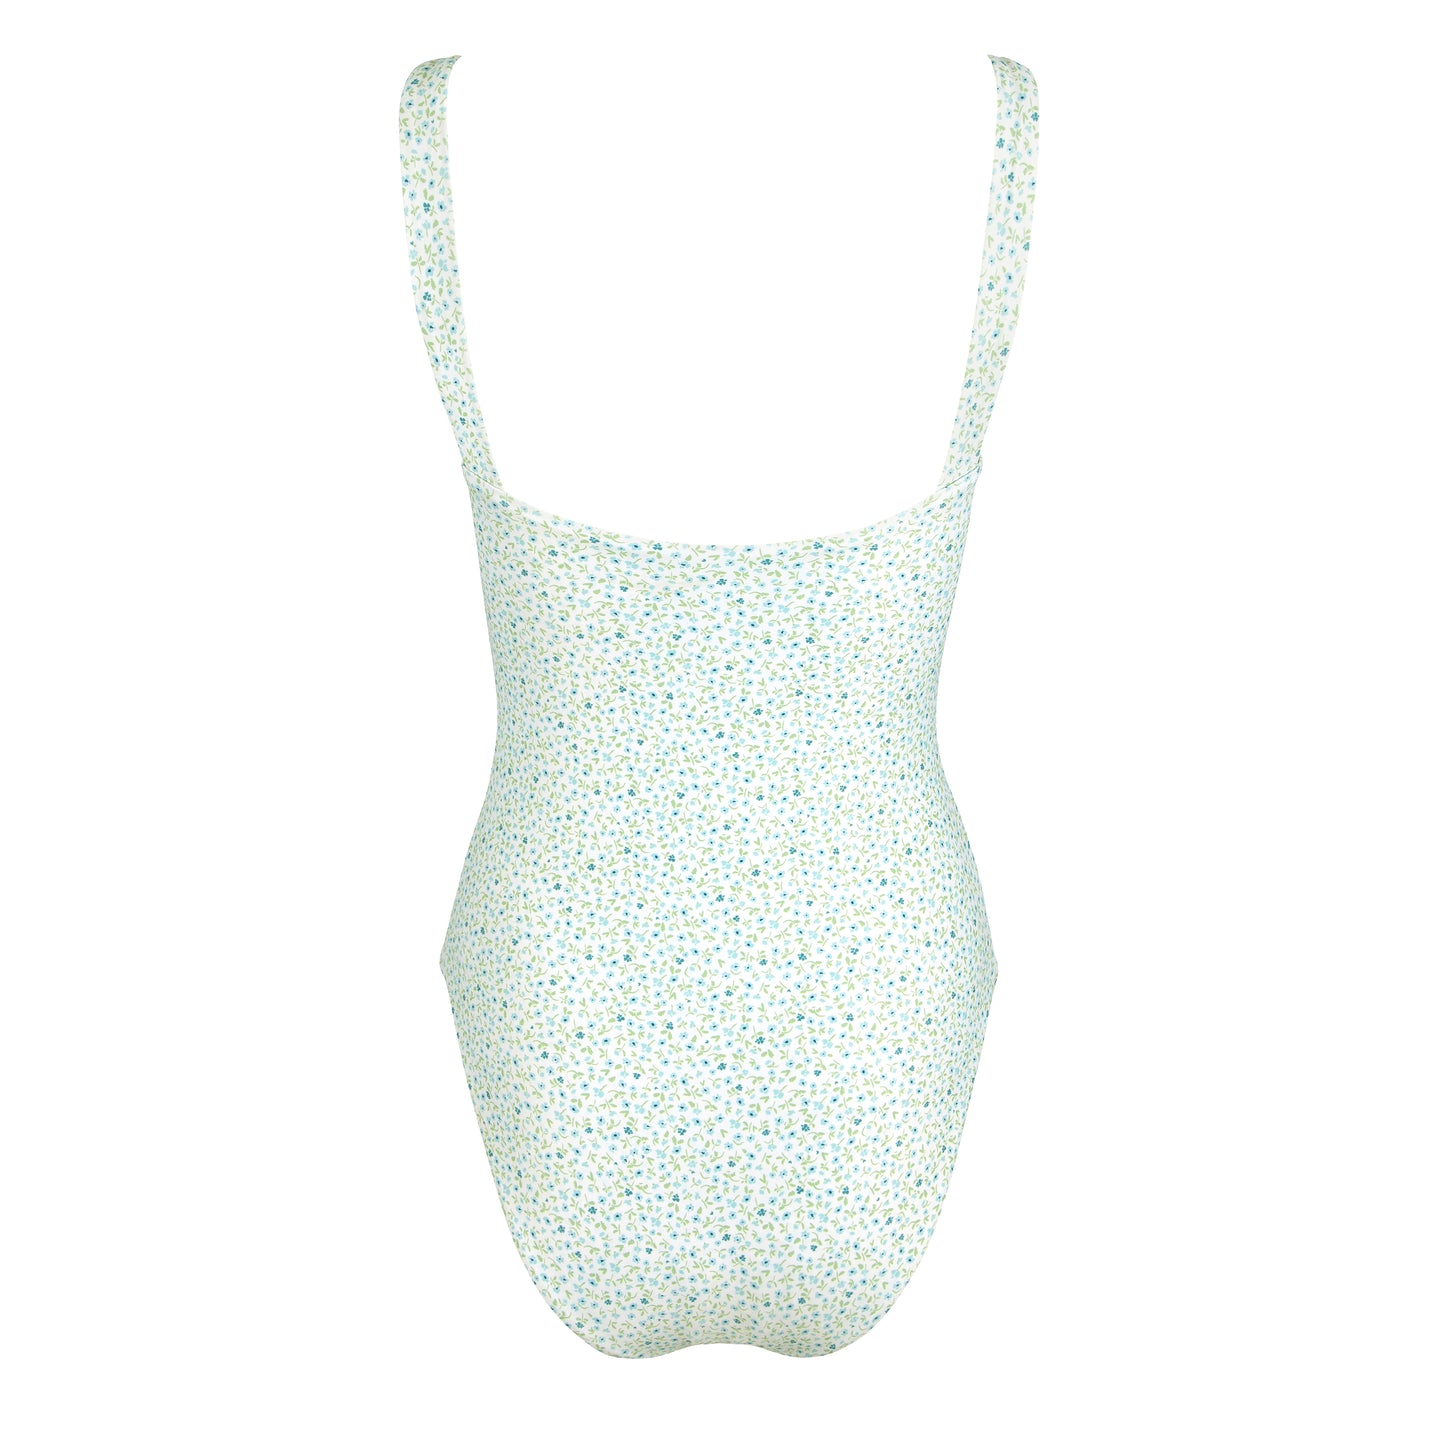 Swimwear- Hibiscus Ditsy Floral One Piece